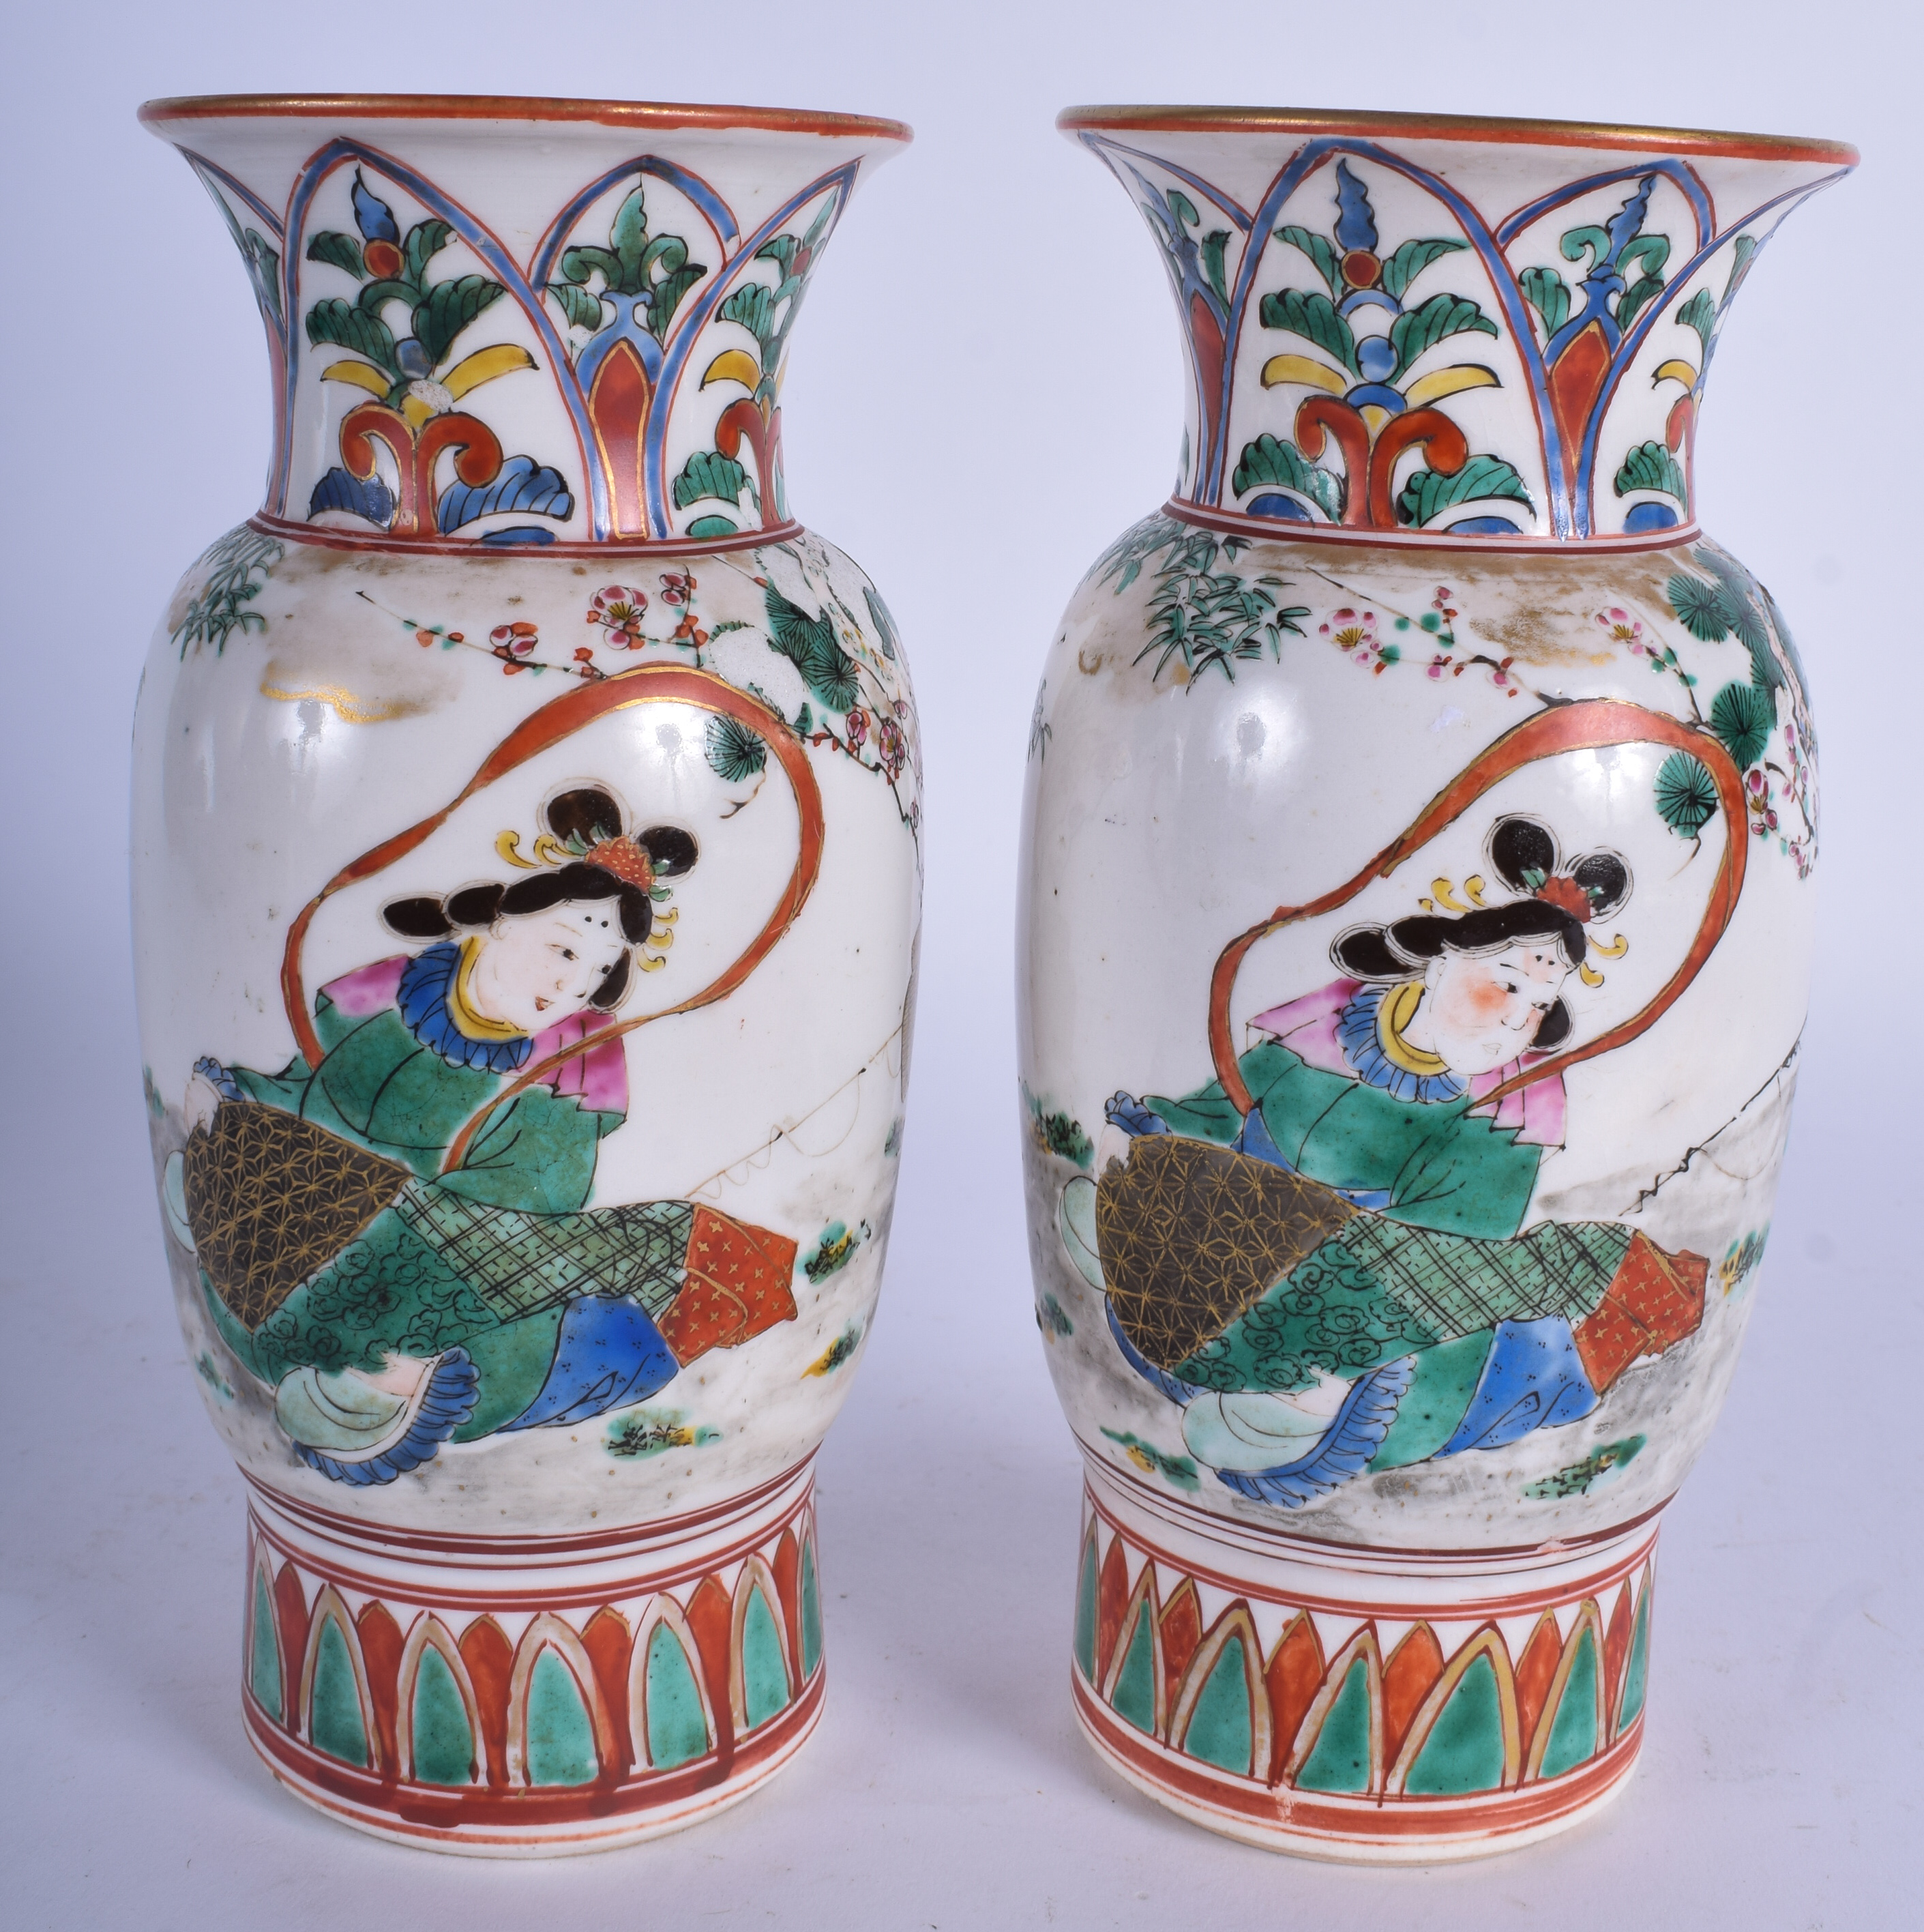 A PAIR OF 19TH CENTURY JAPANESE MEIJI PERIOD KUTANI VASES painted with figures. 19 cm high. - Image 2 of 3